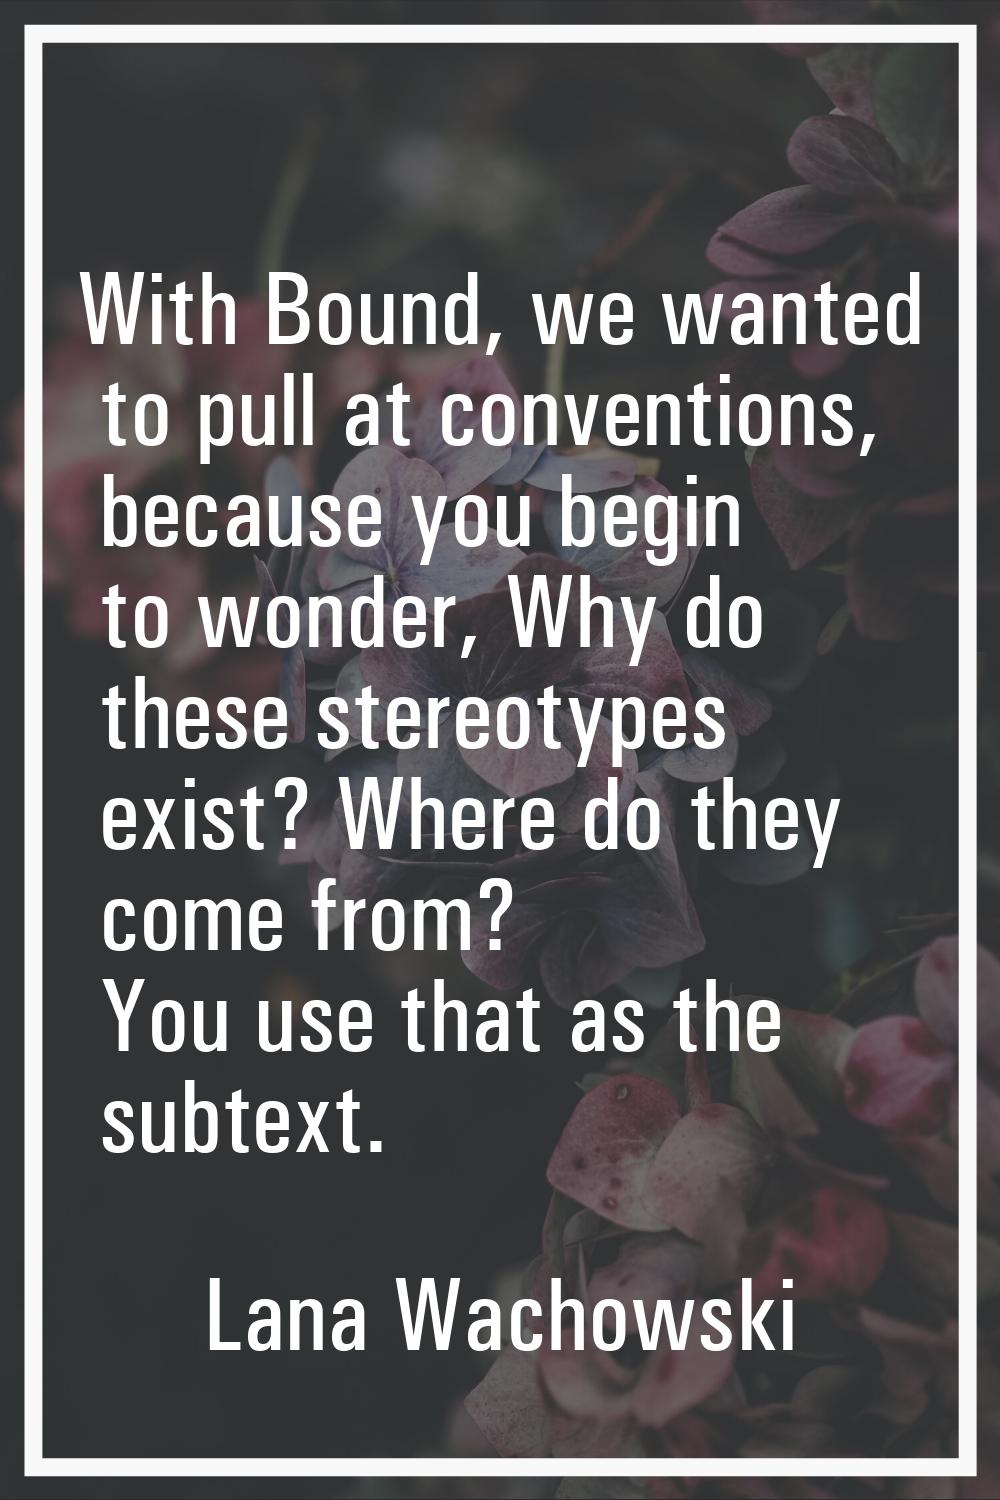 With Bound, we wanted to pull at conventions, because you begin to wonder, Why do these stereotypes